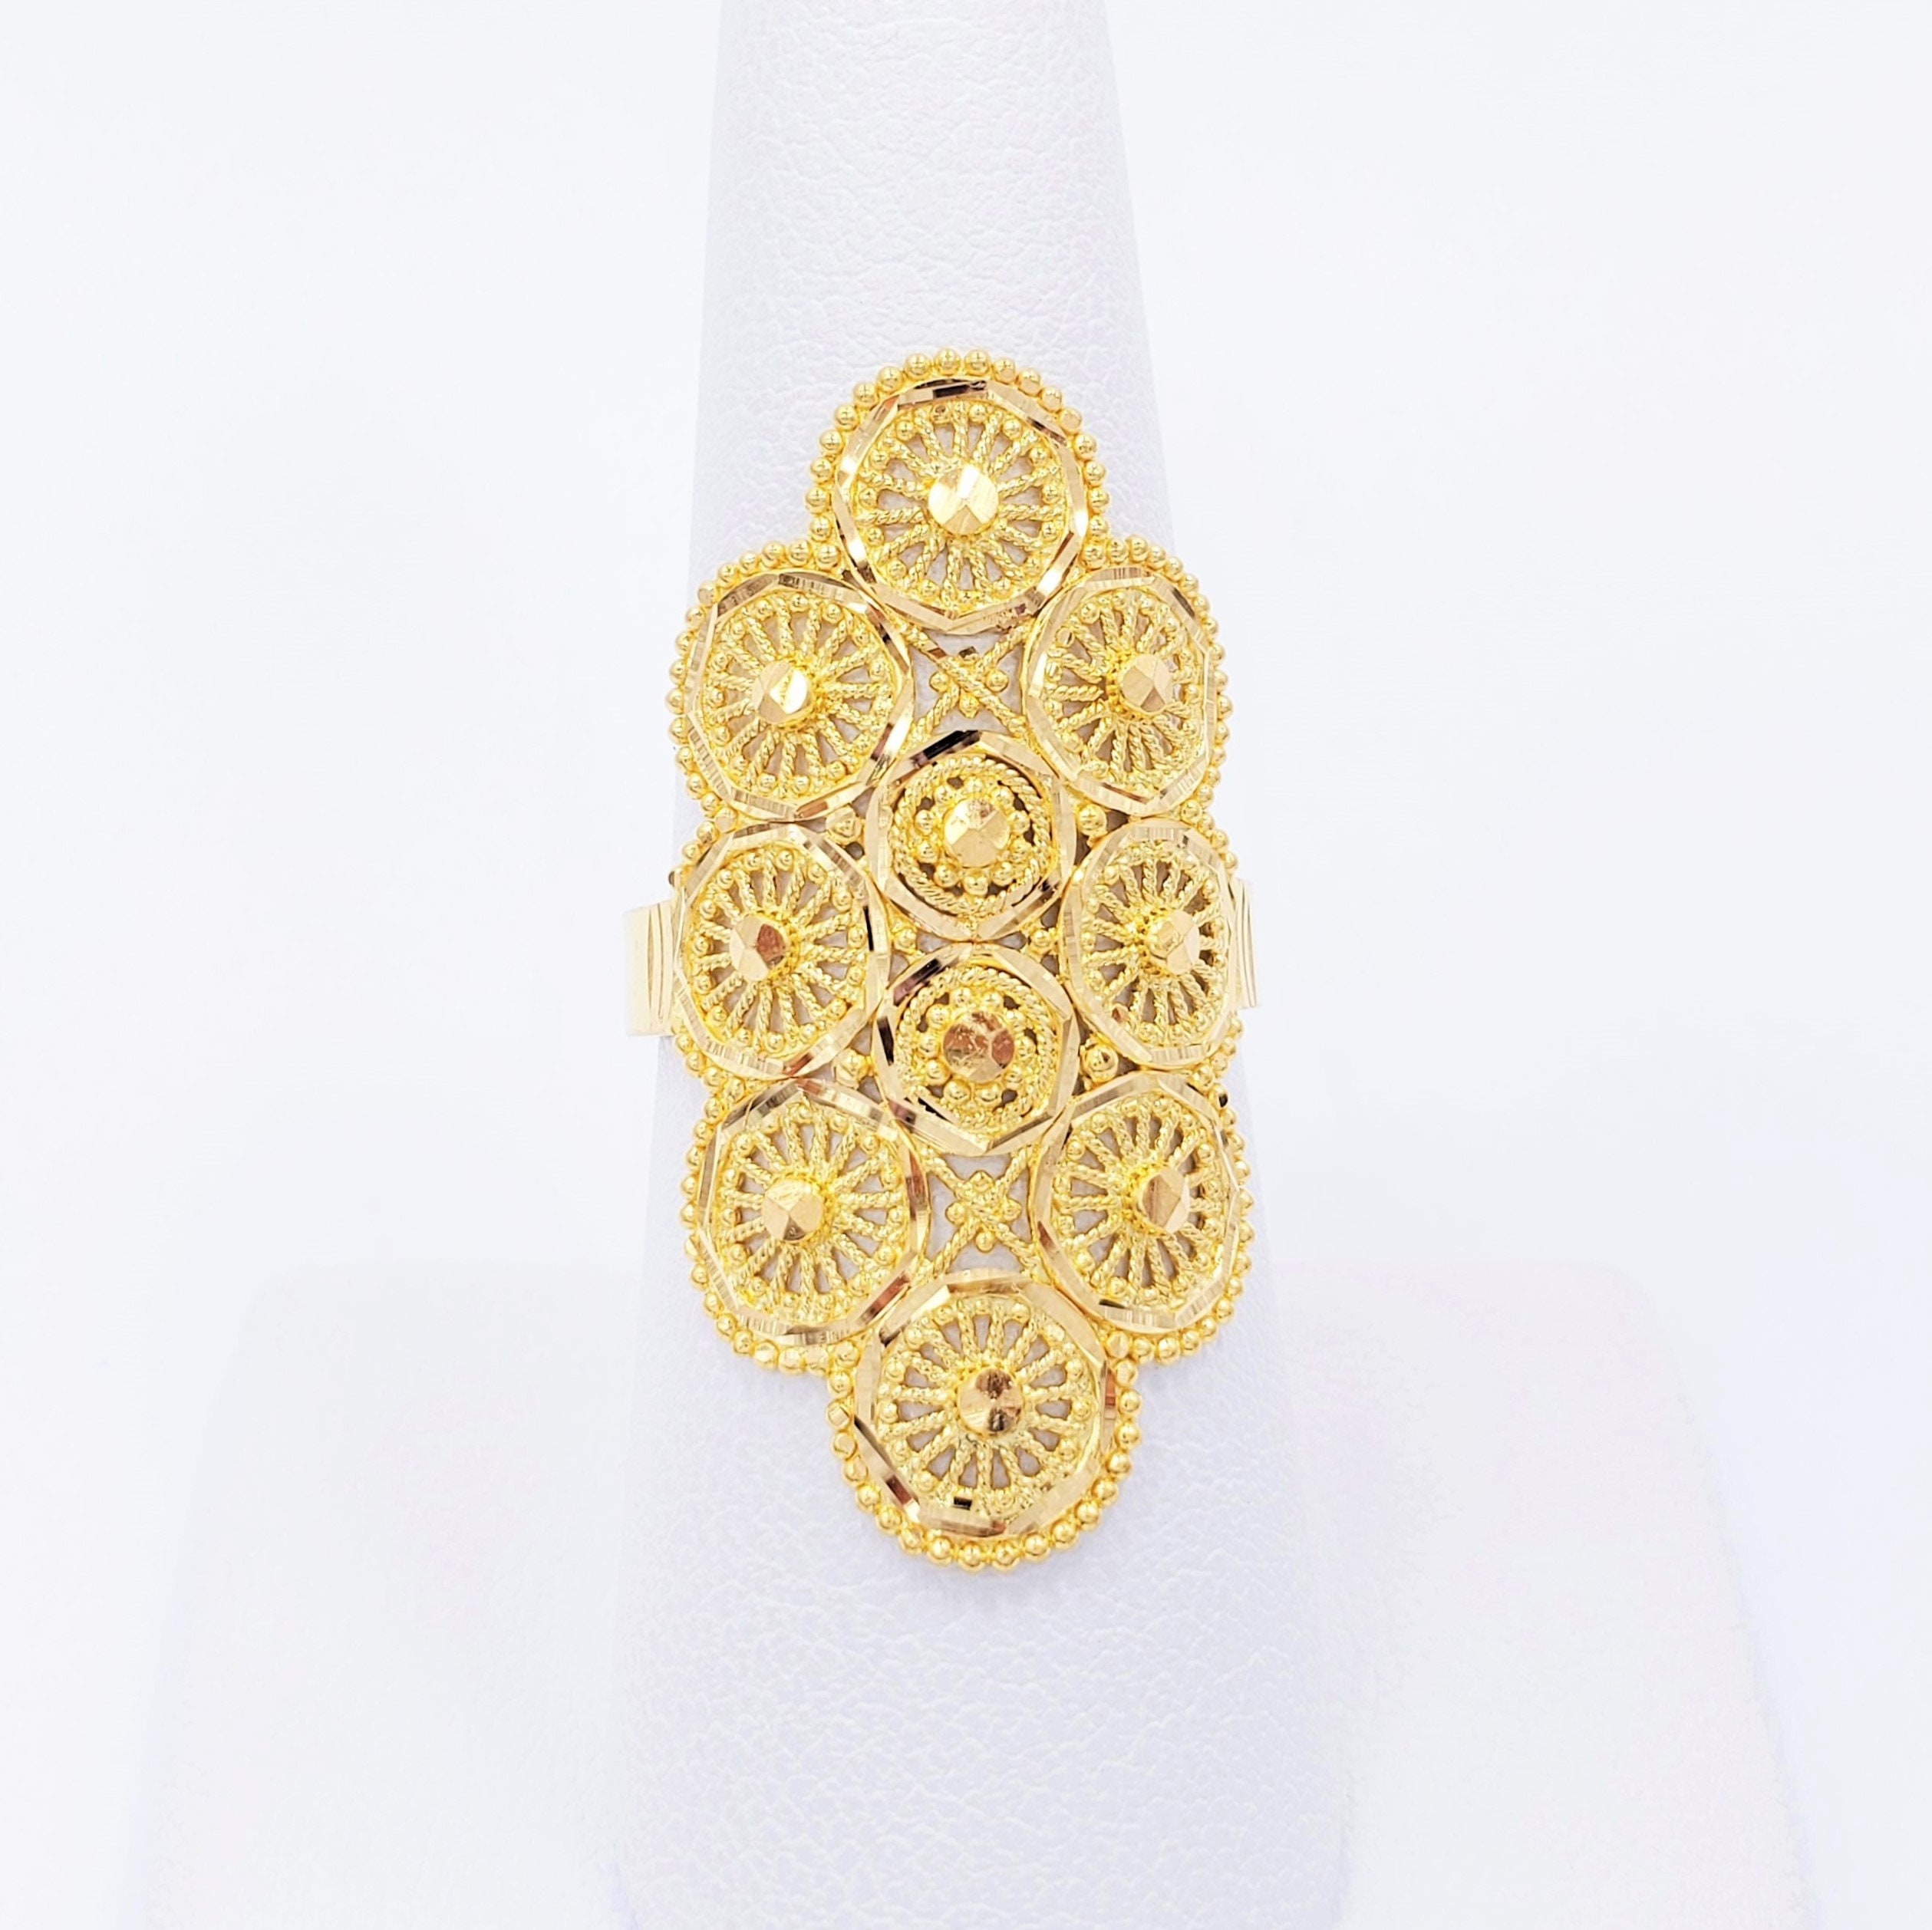 Two Tone 18k Gold Statement Diamond Ring / White and Yellow Gold Broad Ring  | eBay